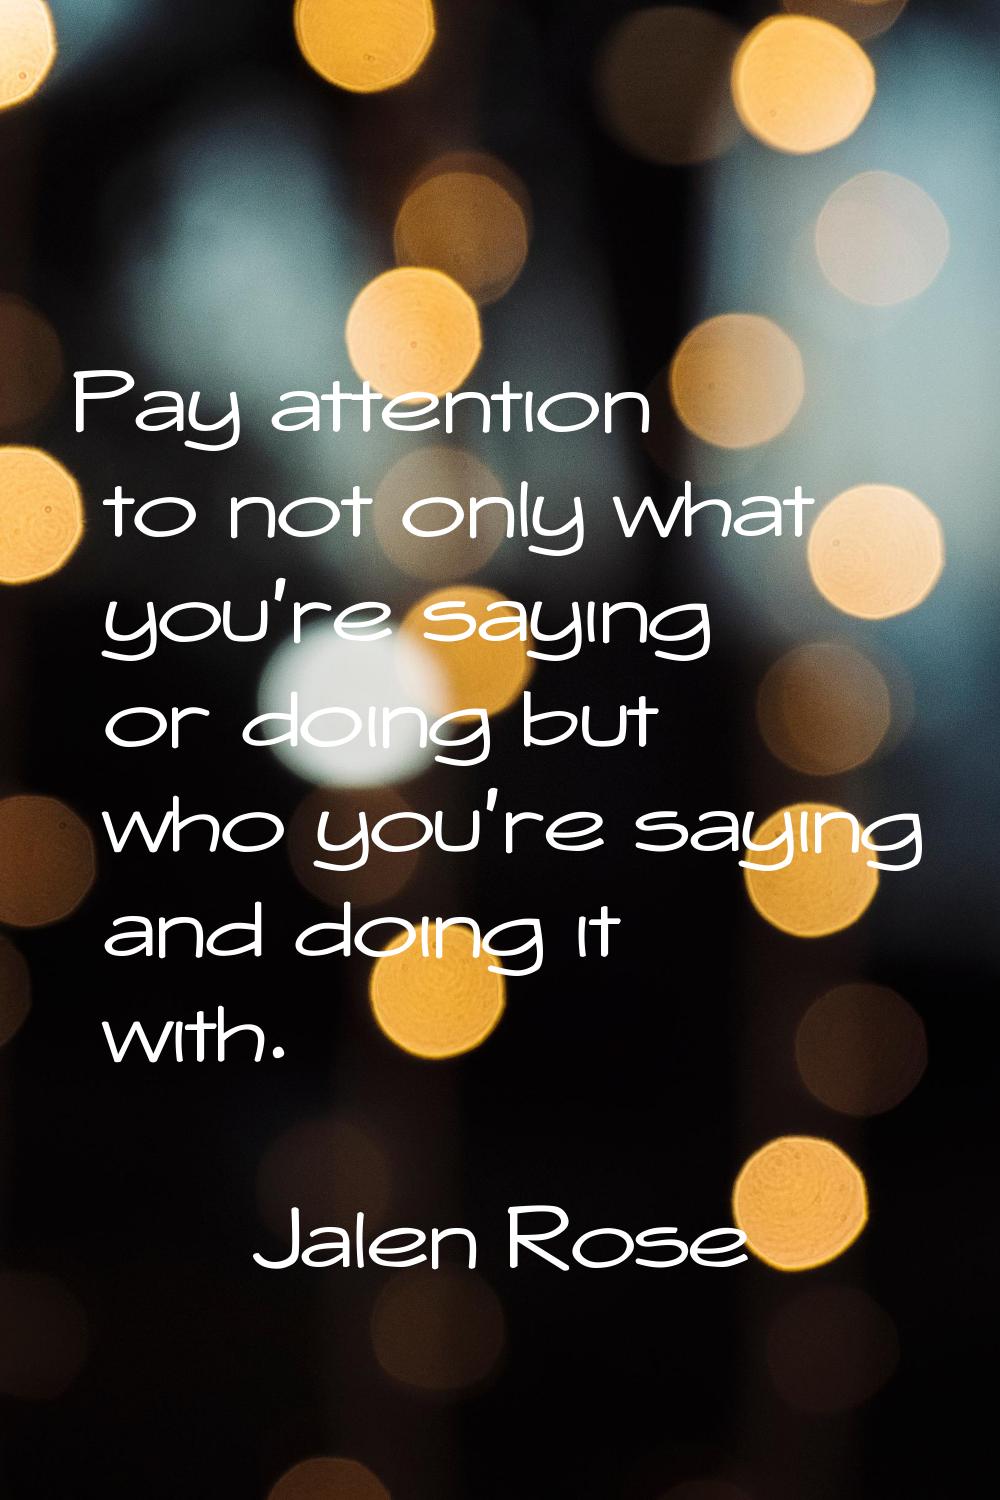 Pay attention to not only what you're saying or doing but who you're saying and doing it with.